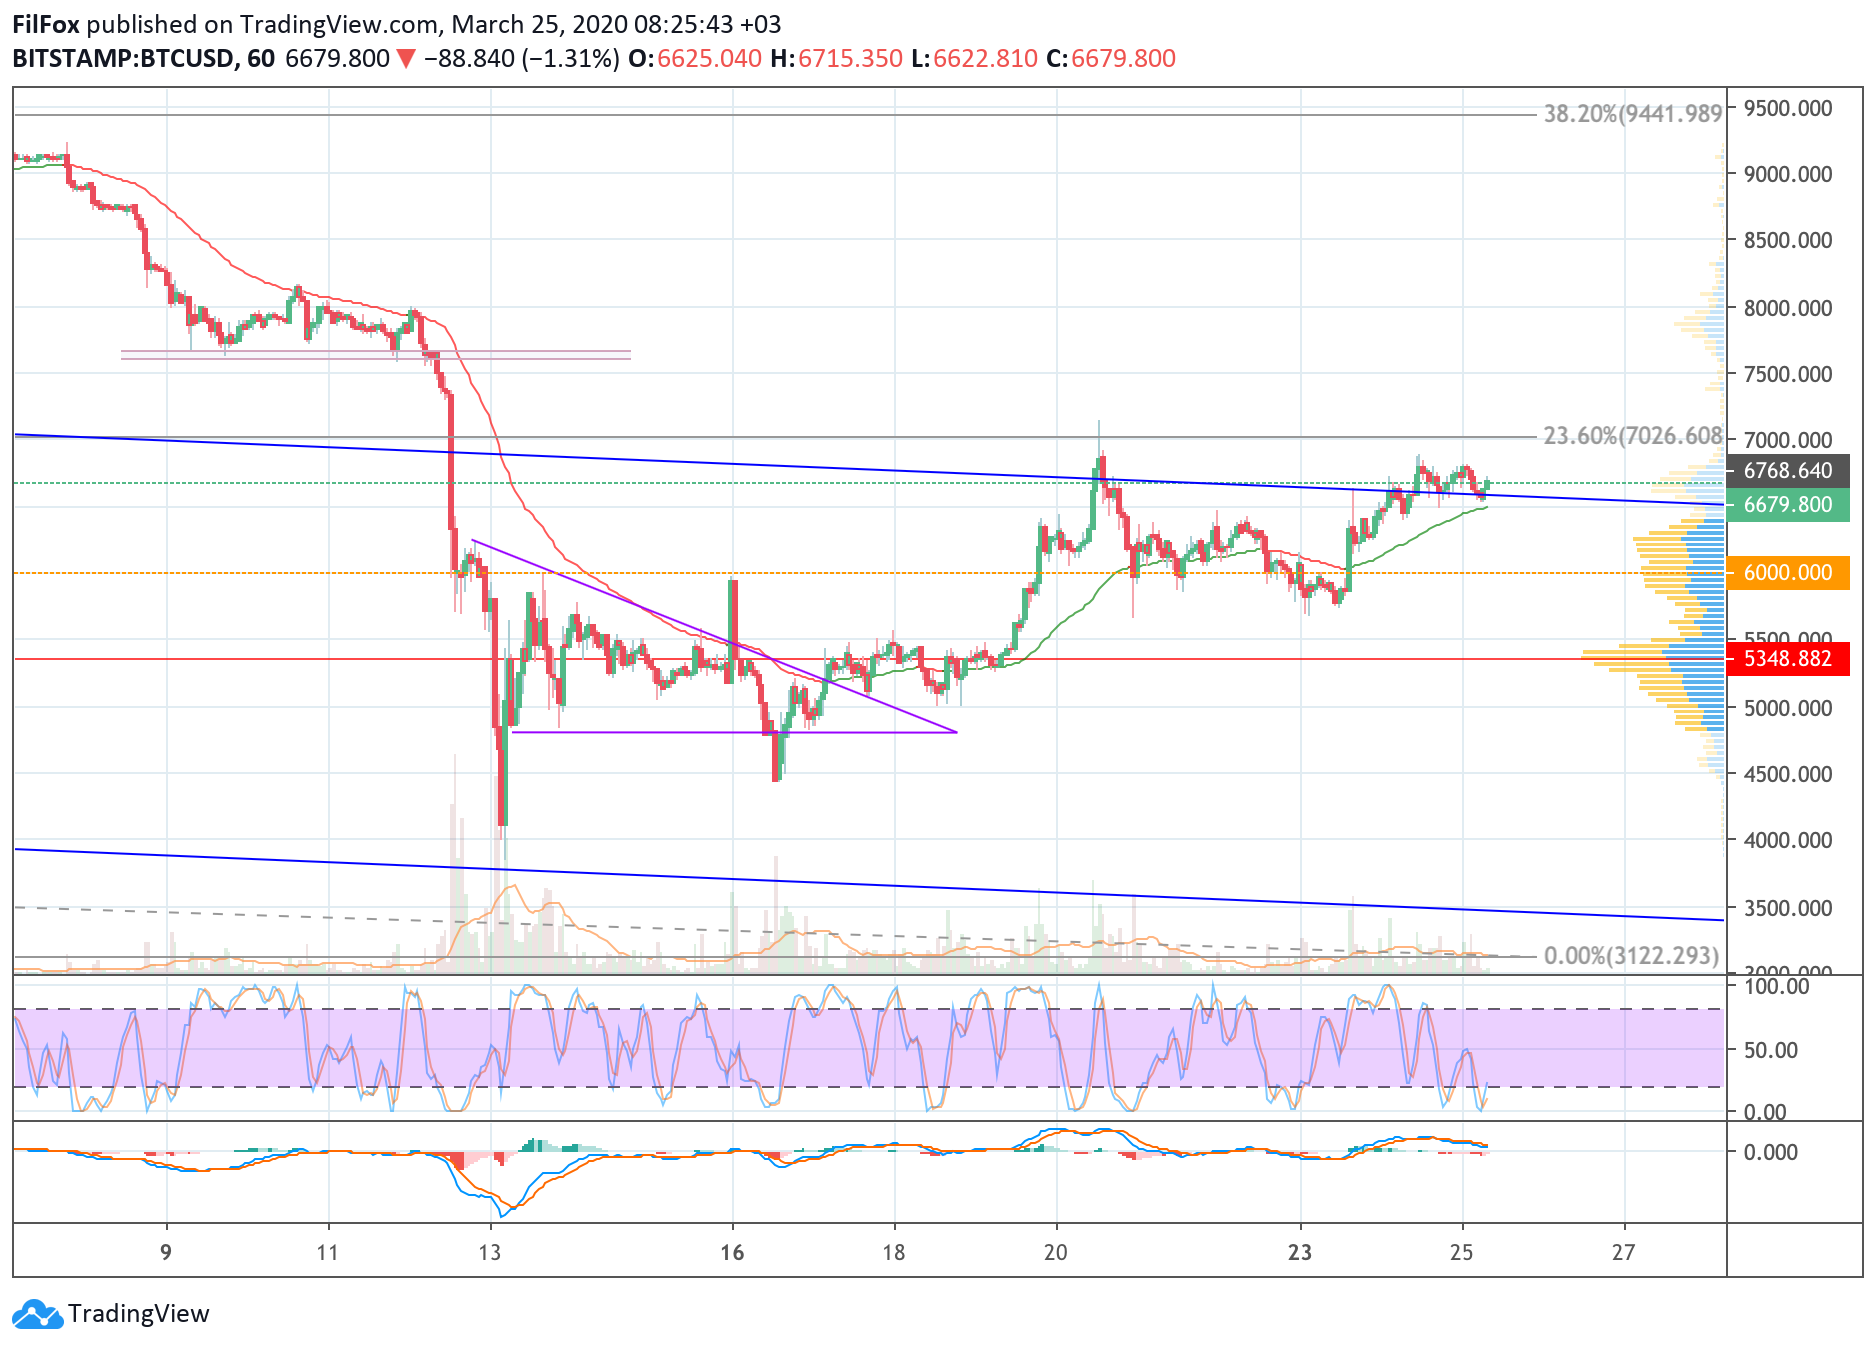 Analysis of cryptocurrency pairs BTC / USD, ETH / USD and XRP / USD on 03/25/2020